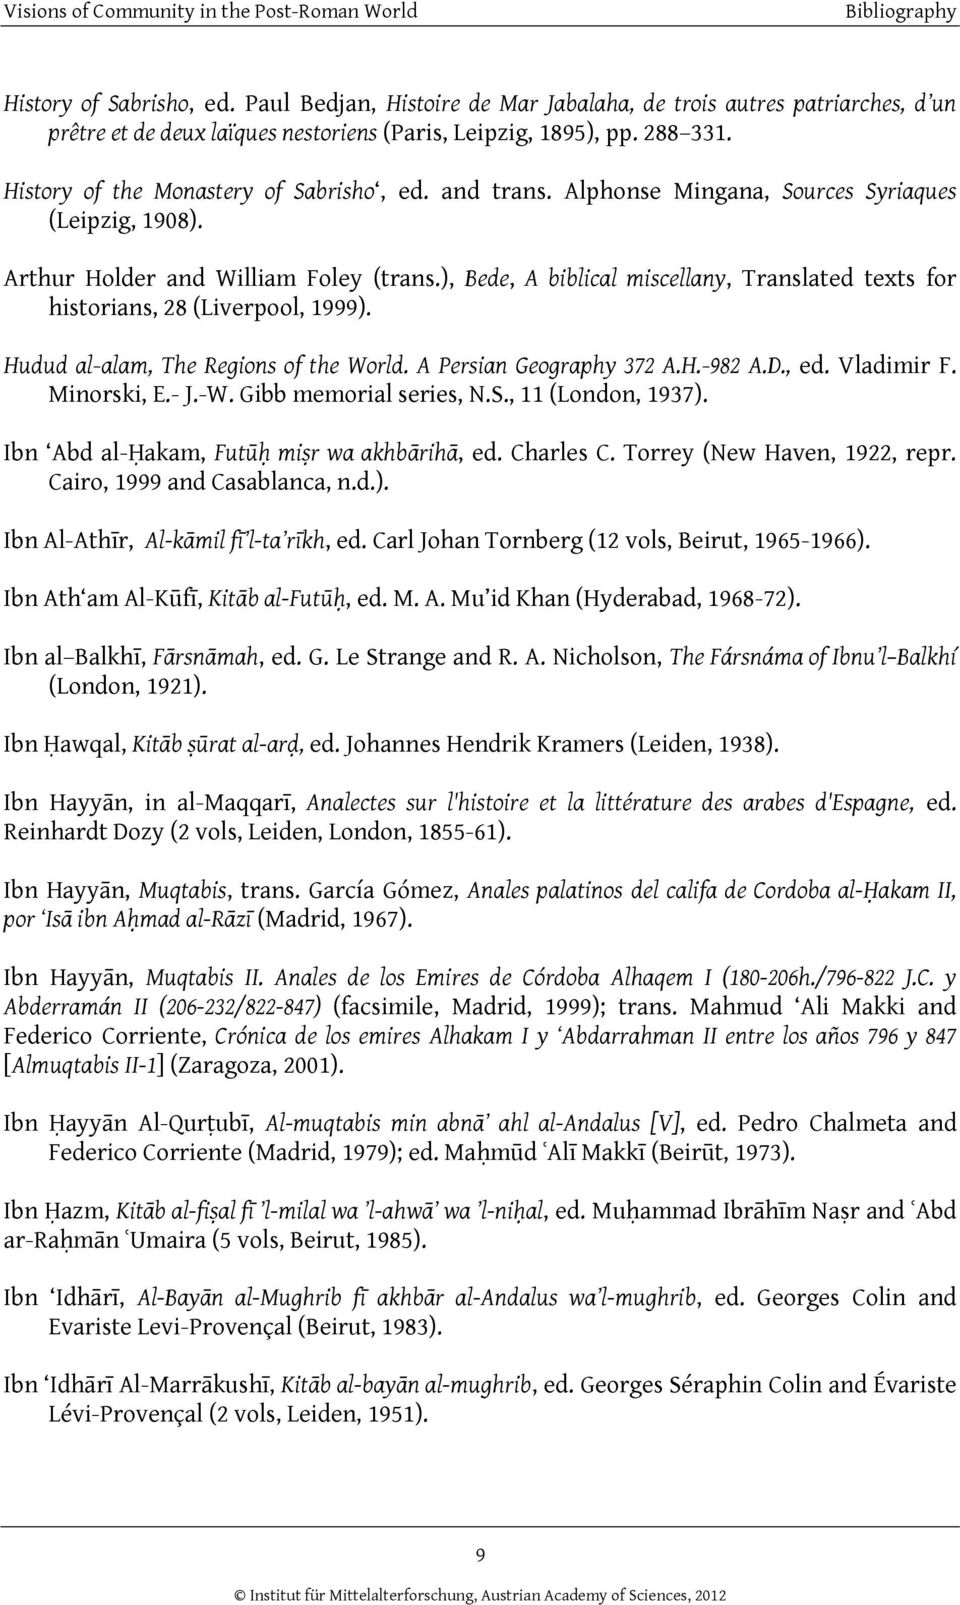 ), Bede, A biblical miscellany, Translated texts for historians, 28 (Liverpool, 1999). Hudud al-alam, The Regions of the World. A Persian Geography 372 A.H.-982 A.D., ed. Vladimir F. Minorski, E.- J.